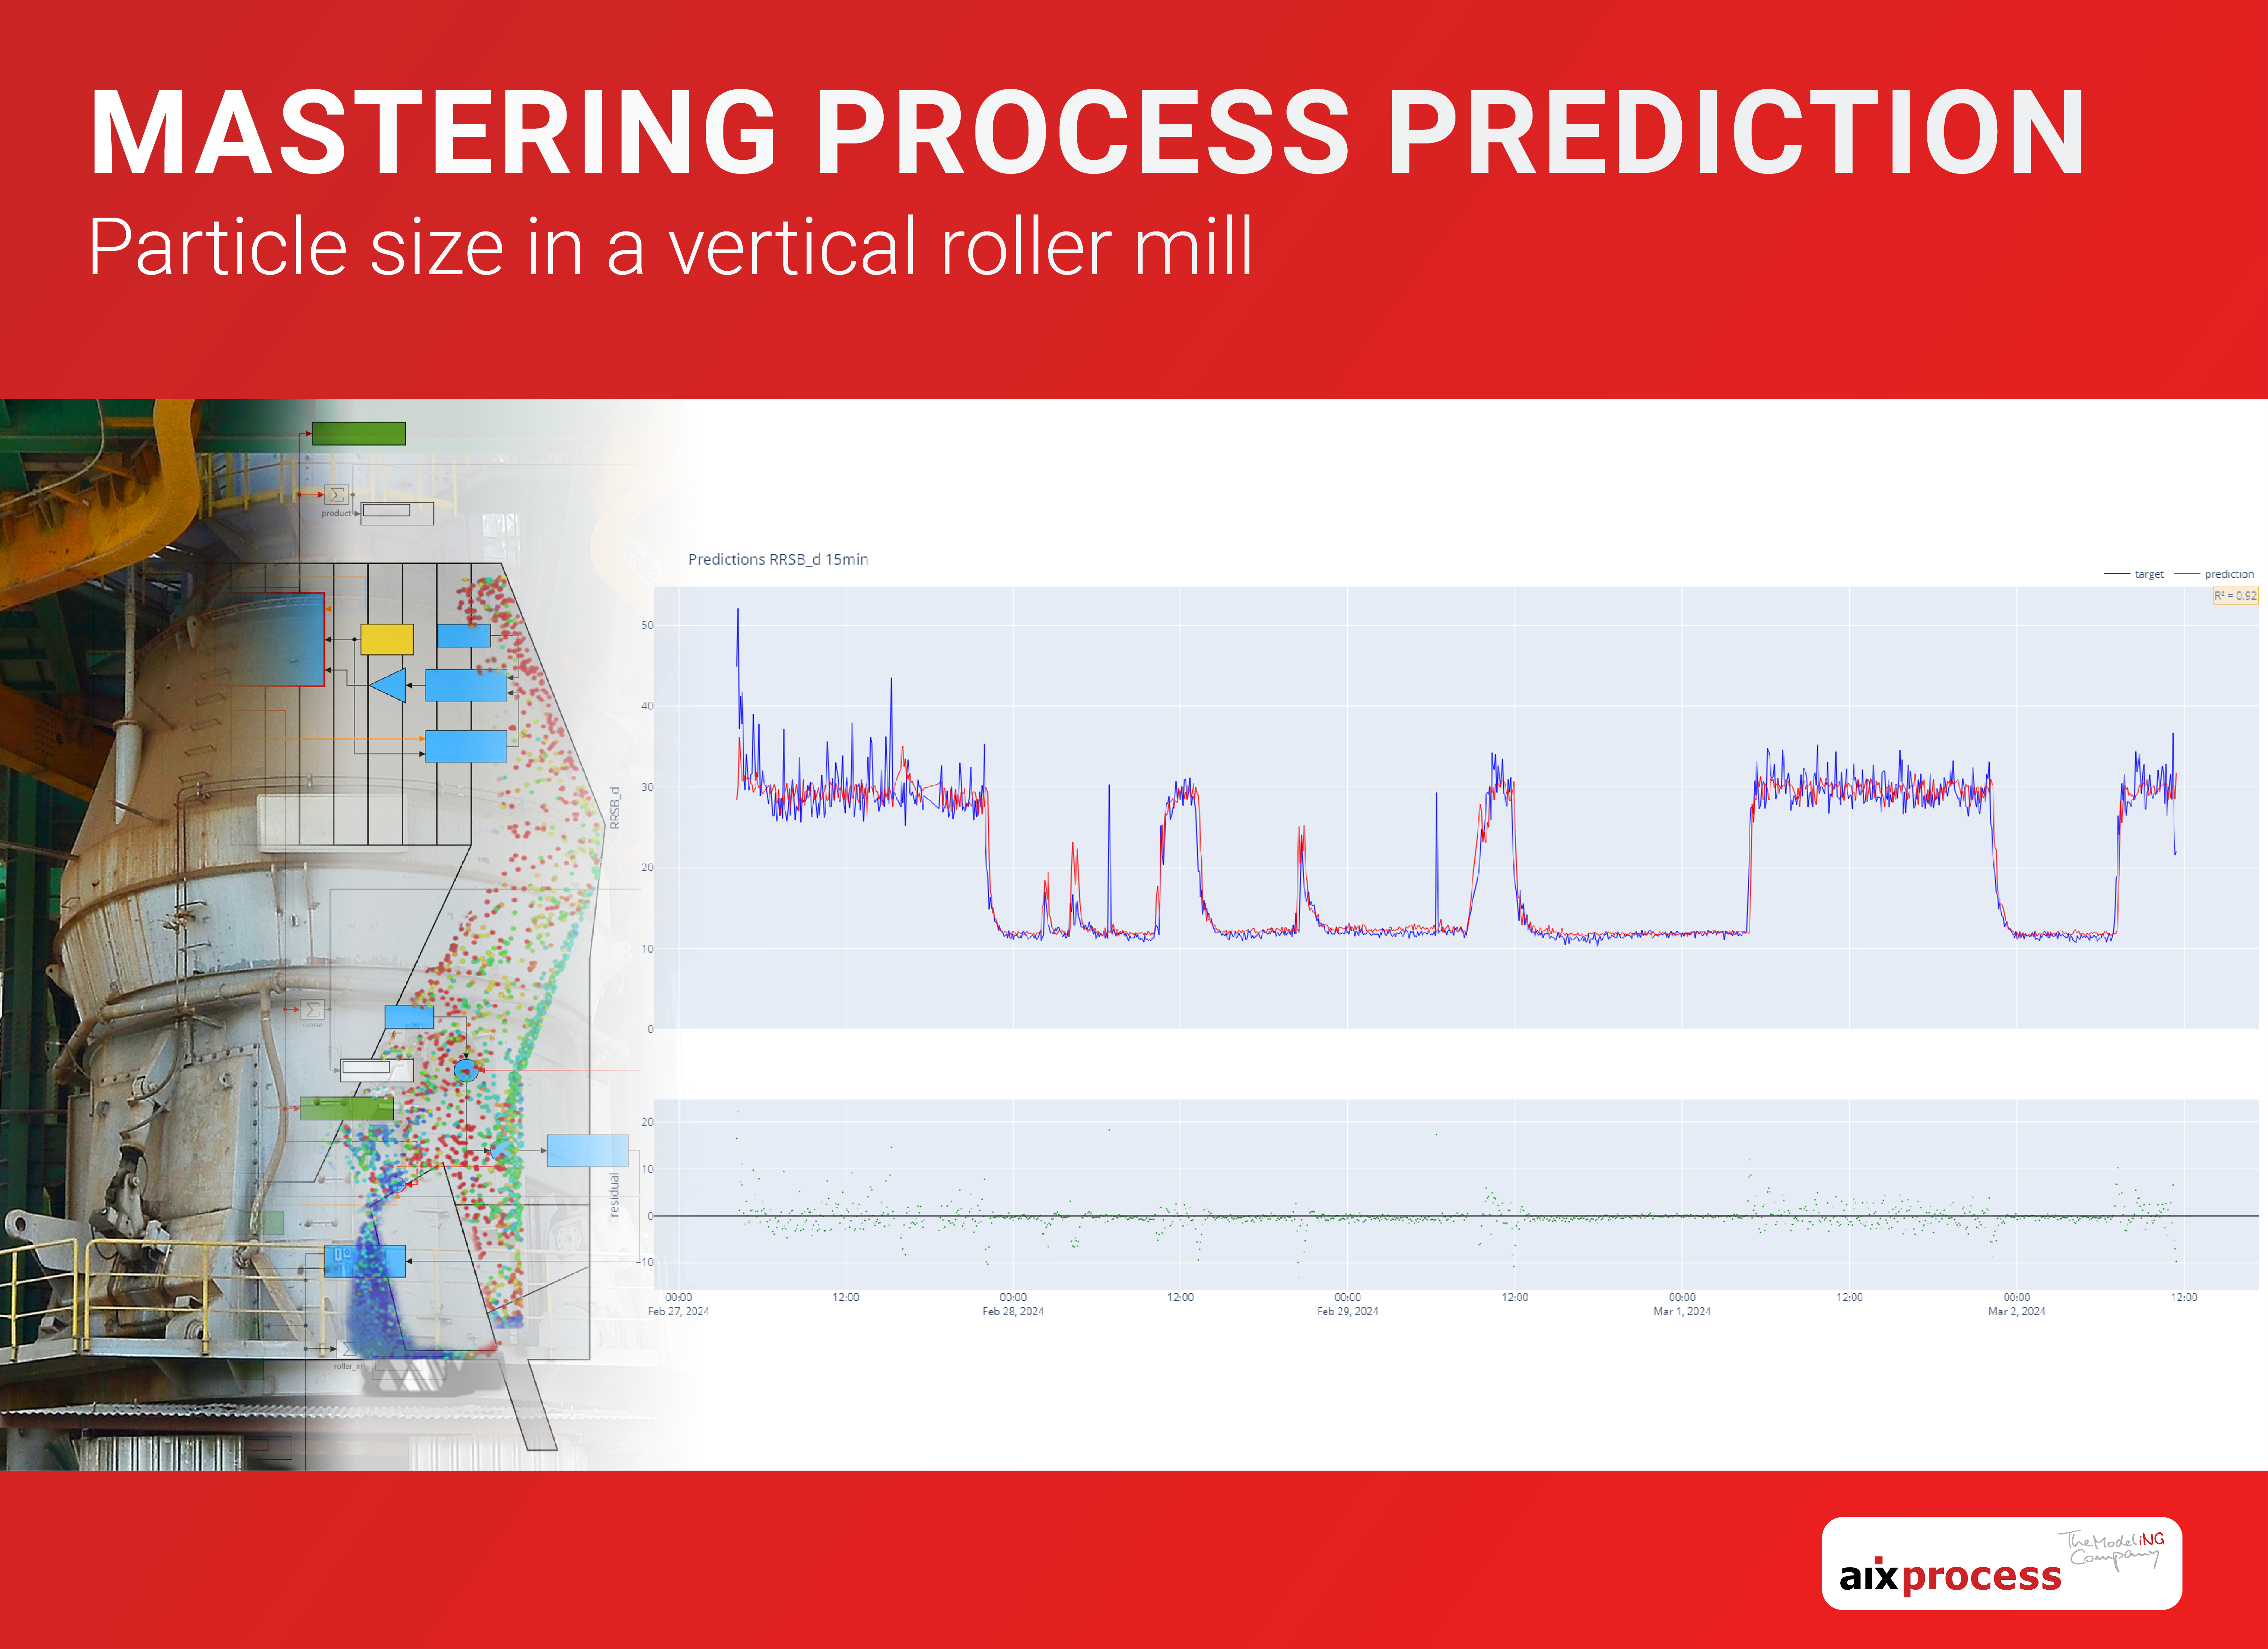 Vertical Roller Mill prediction particles vs. reality